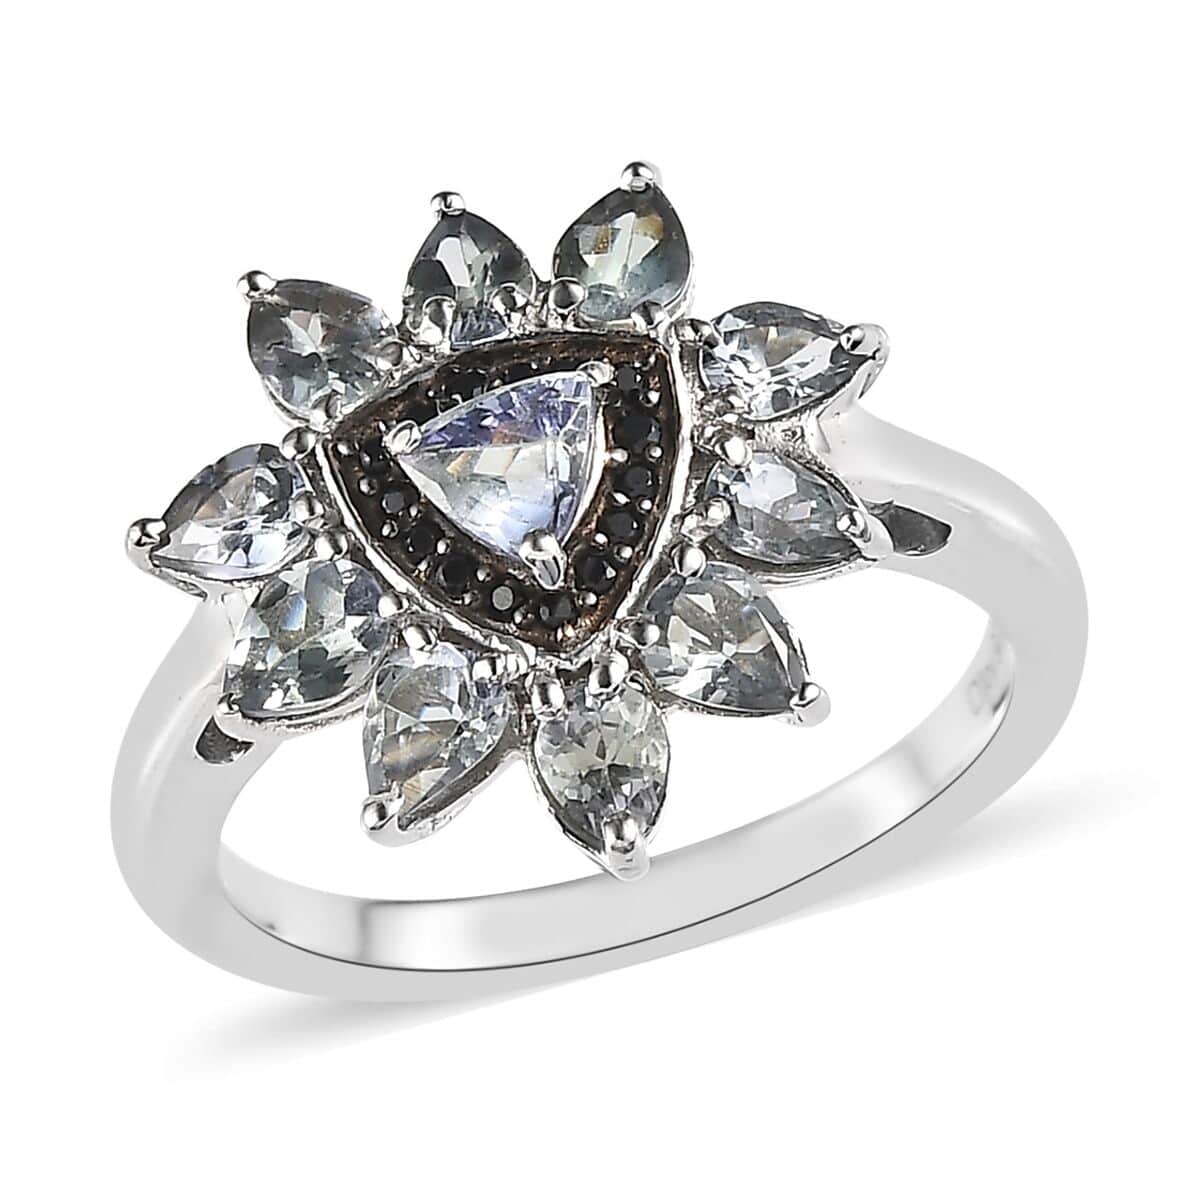 Green Tanzanite and Thai Black Spinel Ring in Platinum Over Sterling Silver 2.00 ctw (Del. in 5-7 Days) image number 0